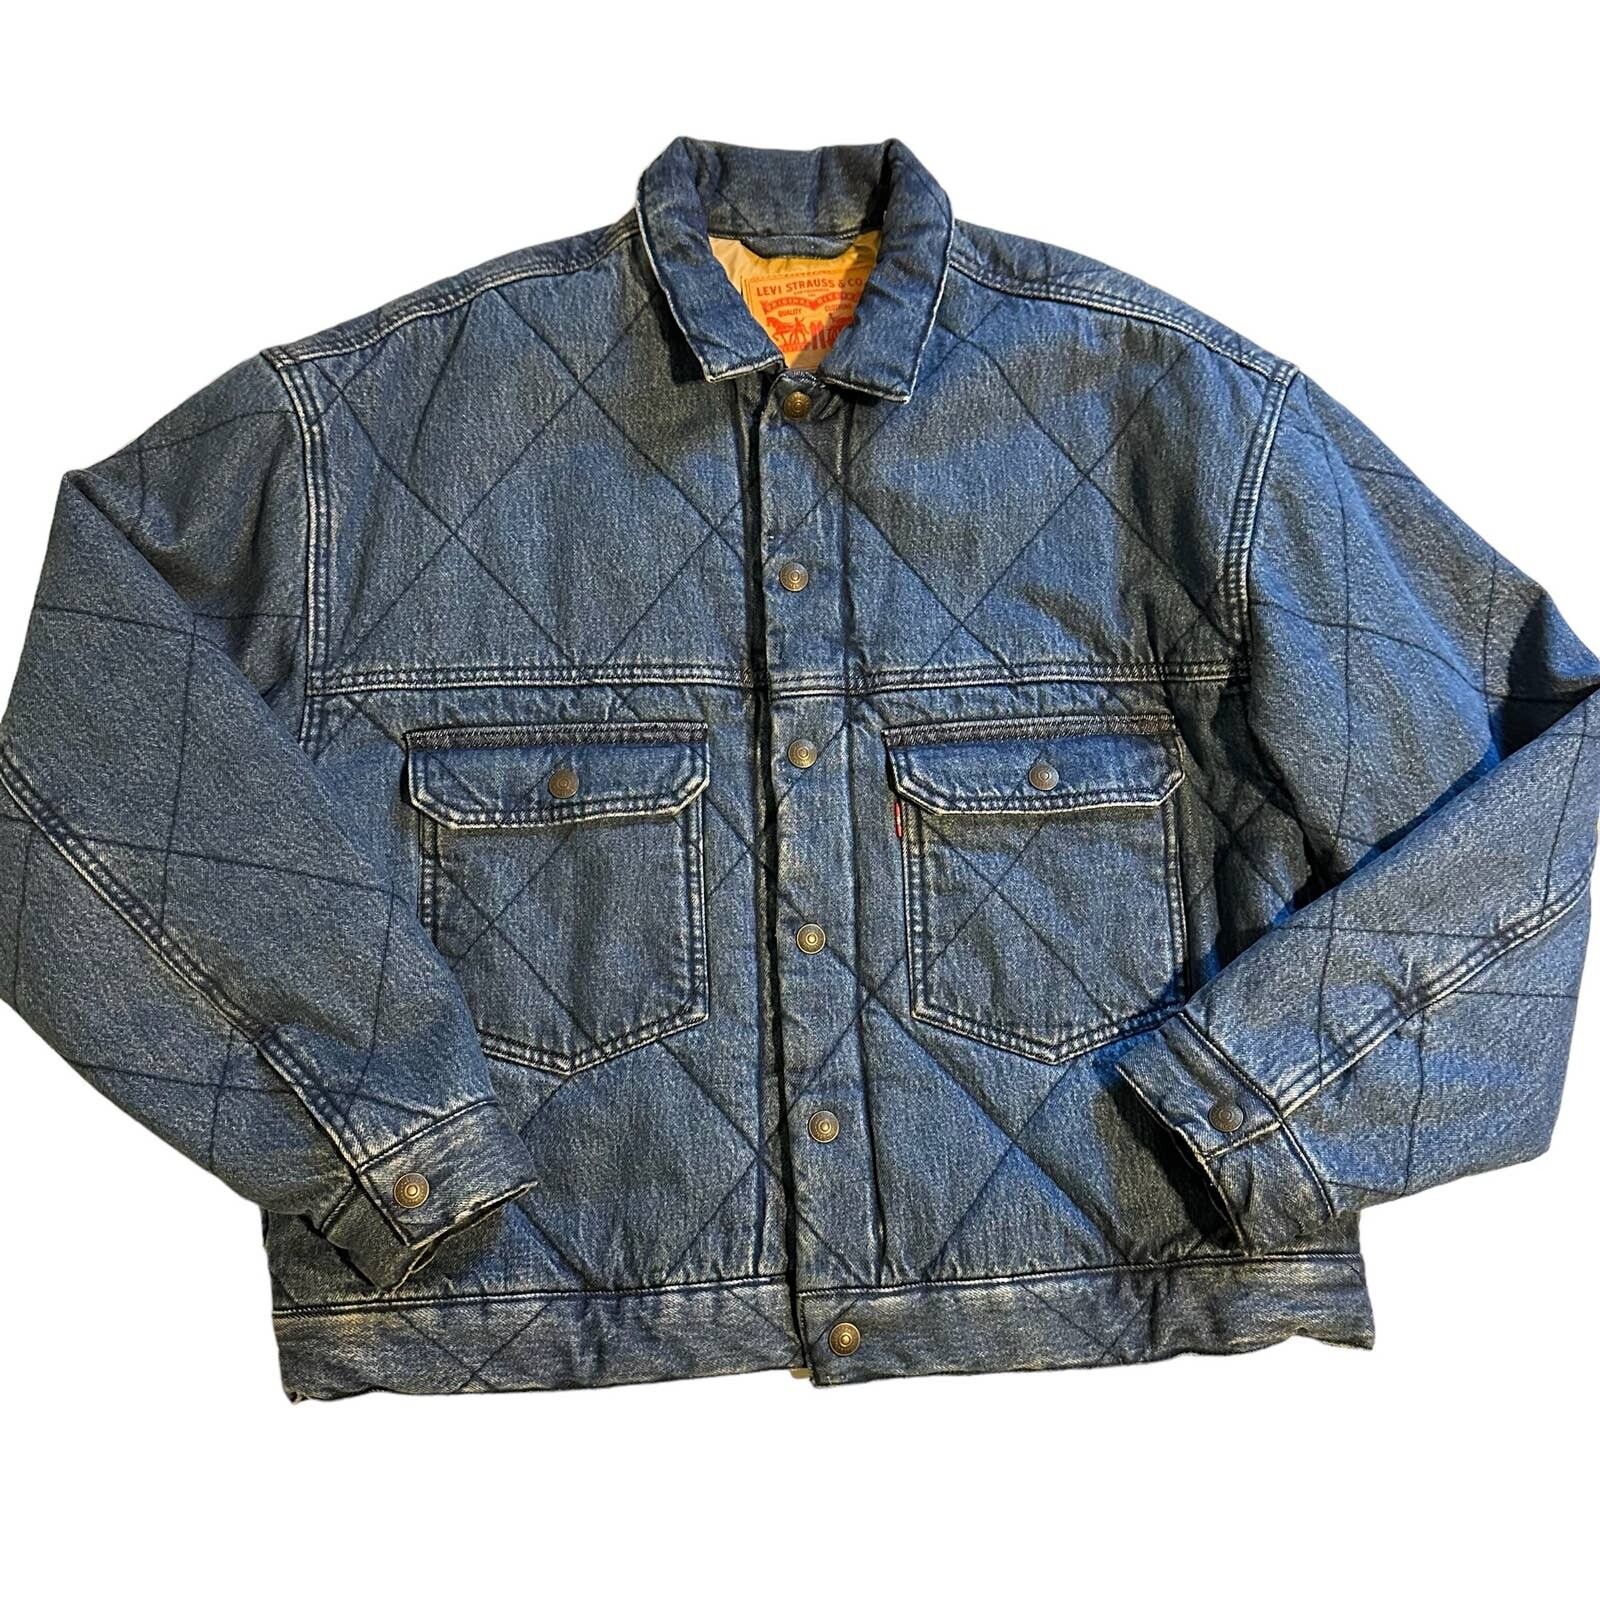 Levi's Levi’s Stay Loose Quilted Type ll Trucker Jacket Medium Size US M / EU 48-50 / 2 - 1 Preview